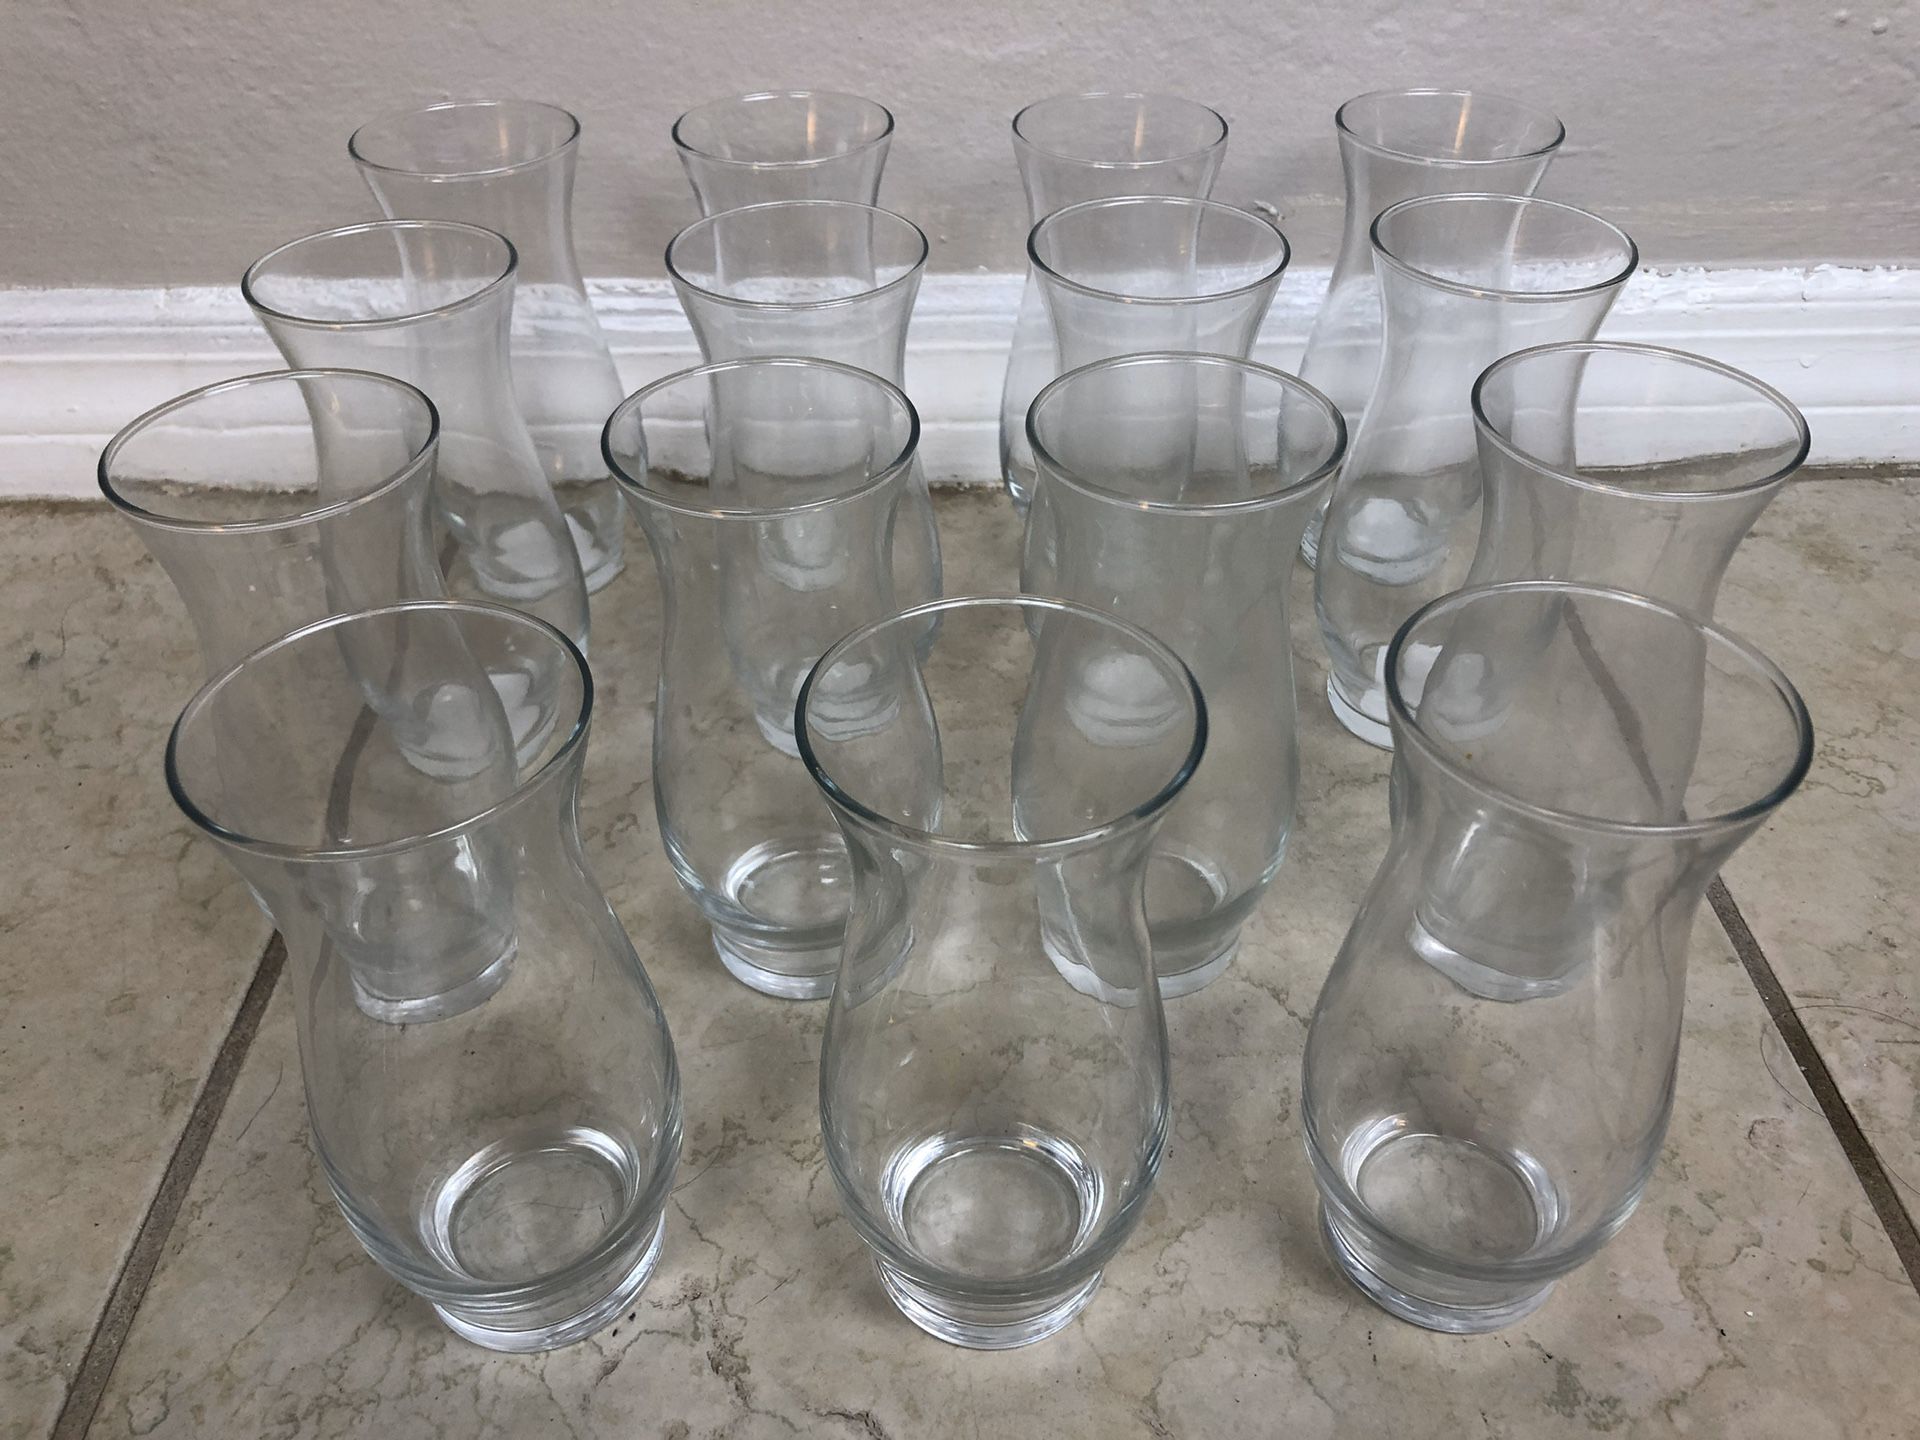 15 Small Glass Carafes for Water, Wine, Mixers / Flower Vases